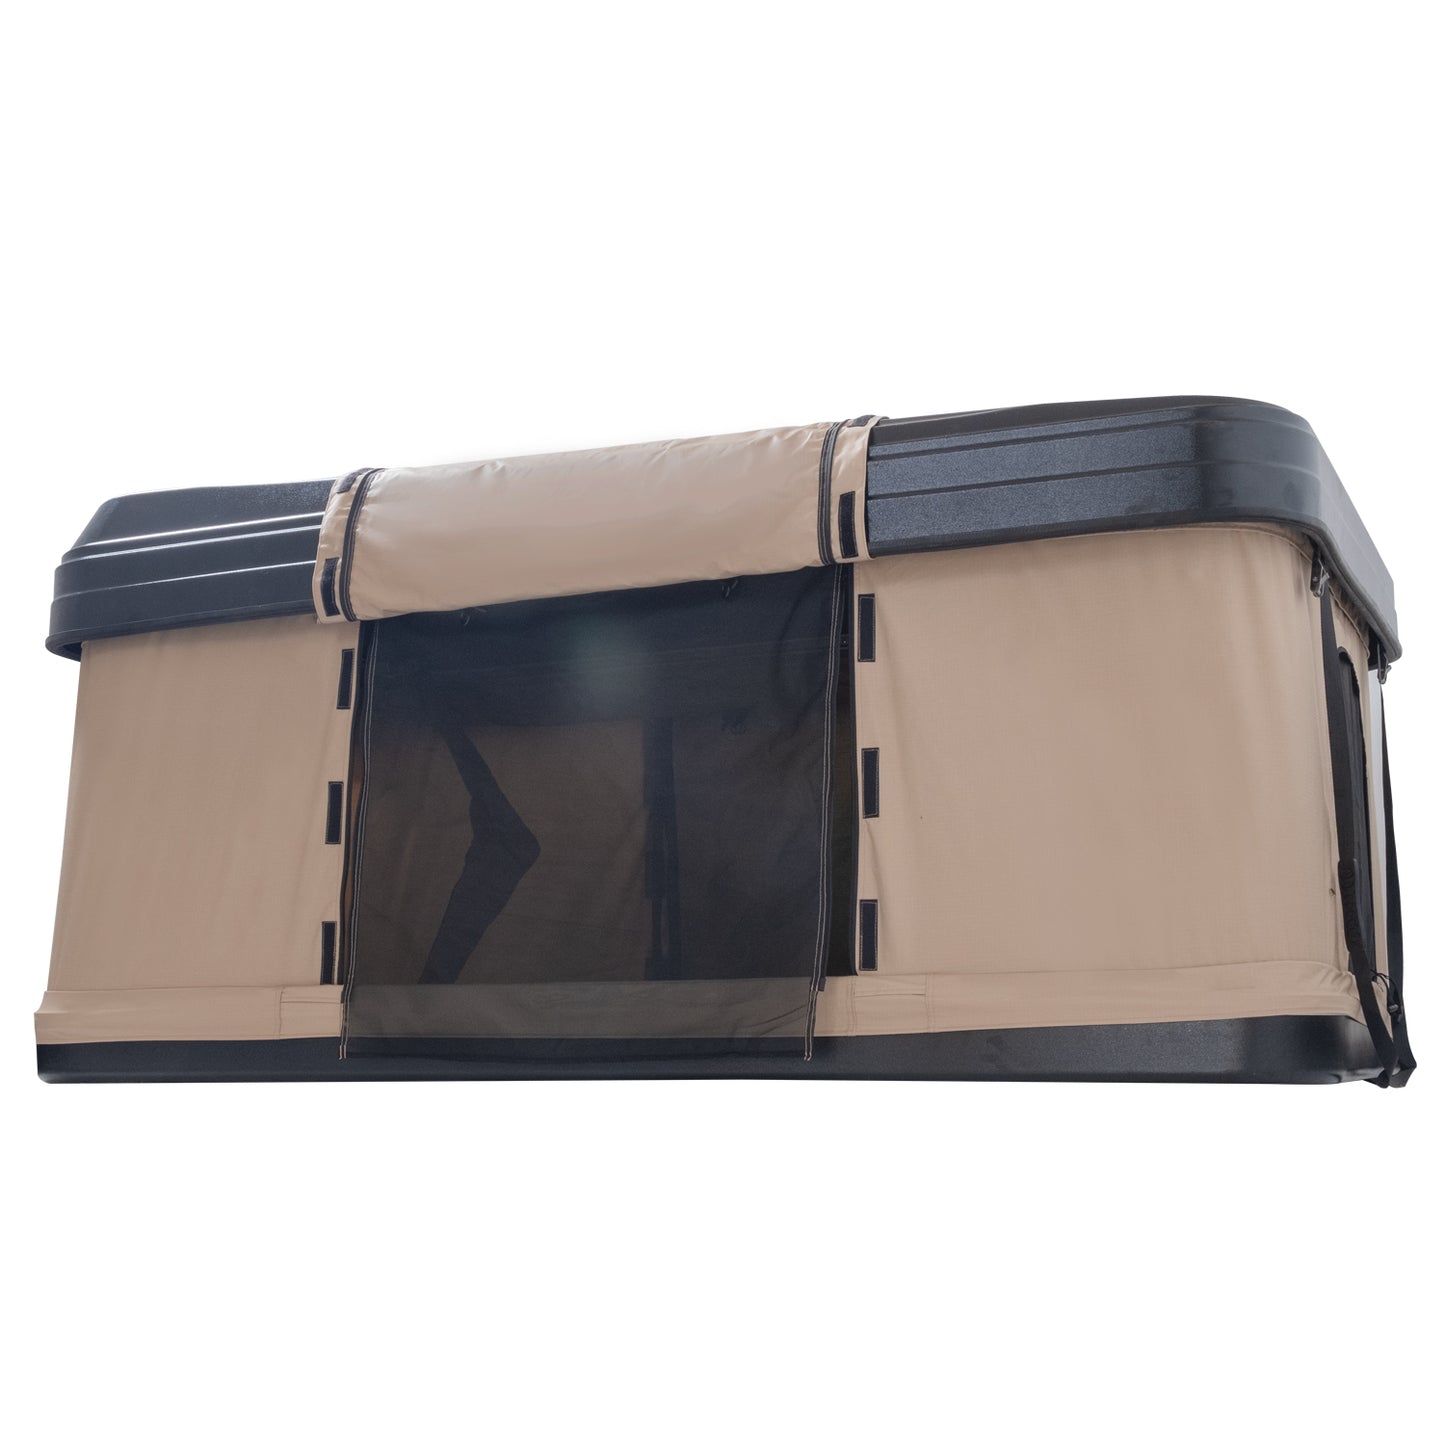 Trustmade Black Hard Shell Beige Rooftop Tent Nomad Series